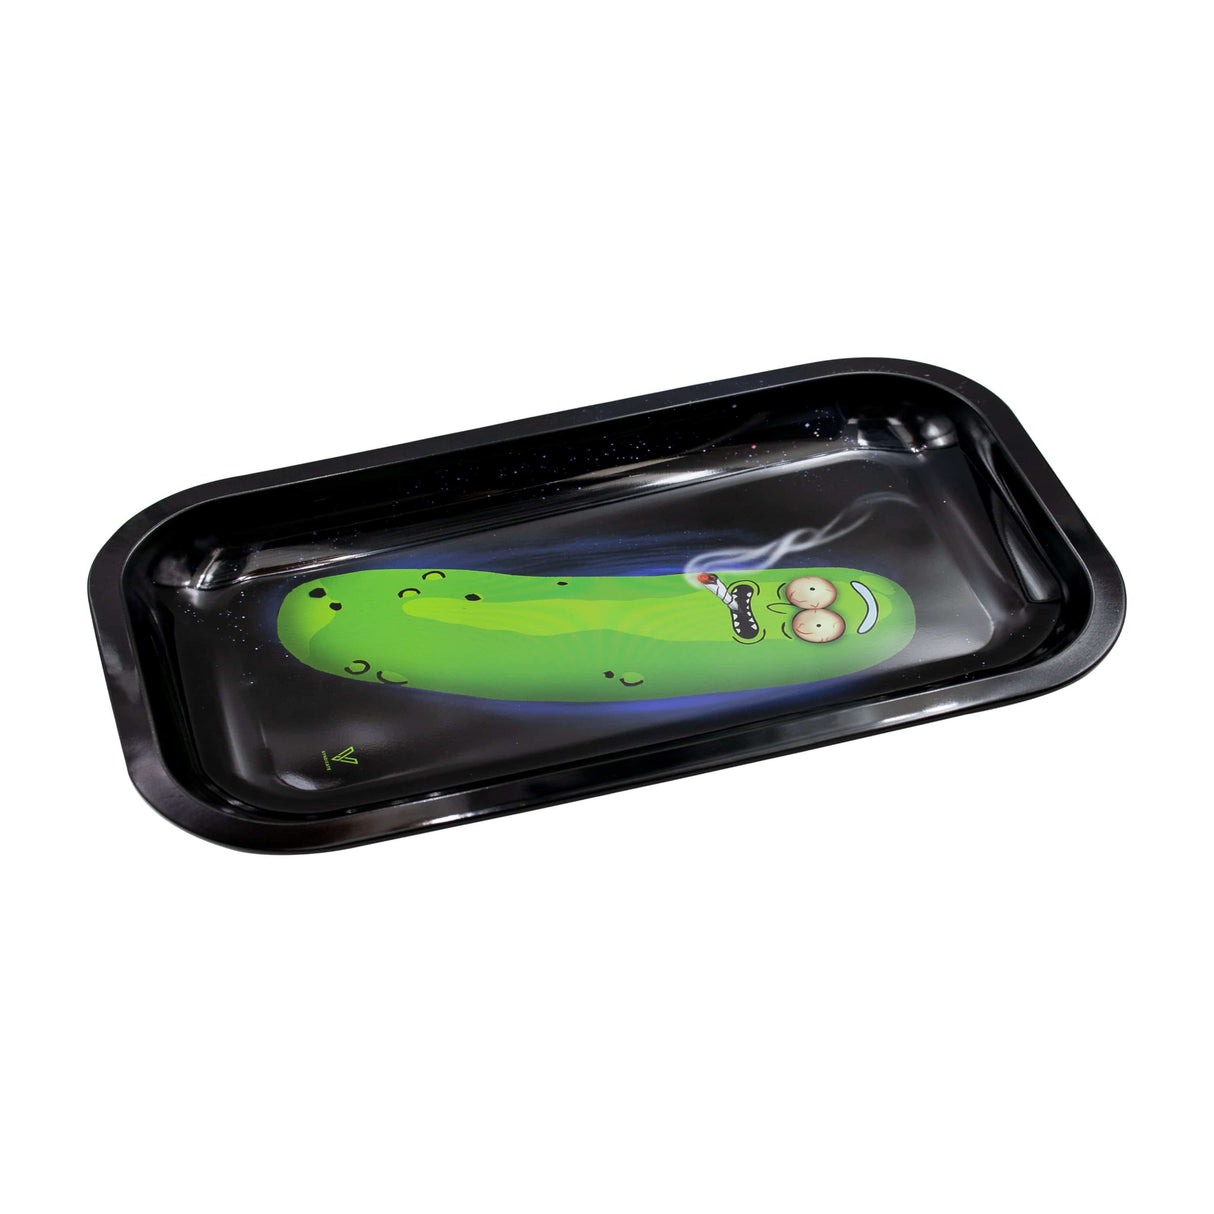 V Syndicate Pickle Metal Rollin' Tray in Black and Green, Fun Novelty Design, Medium Size